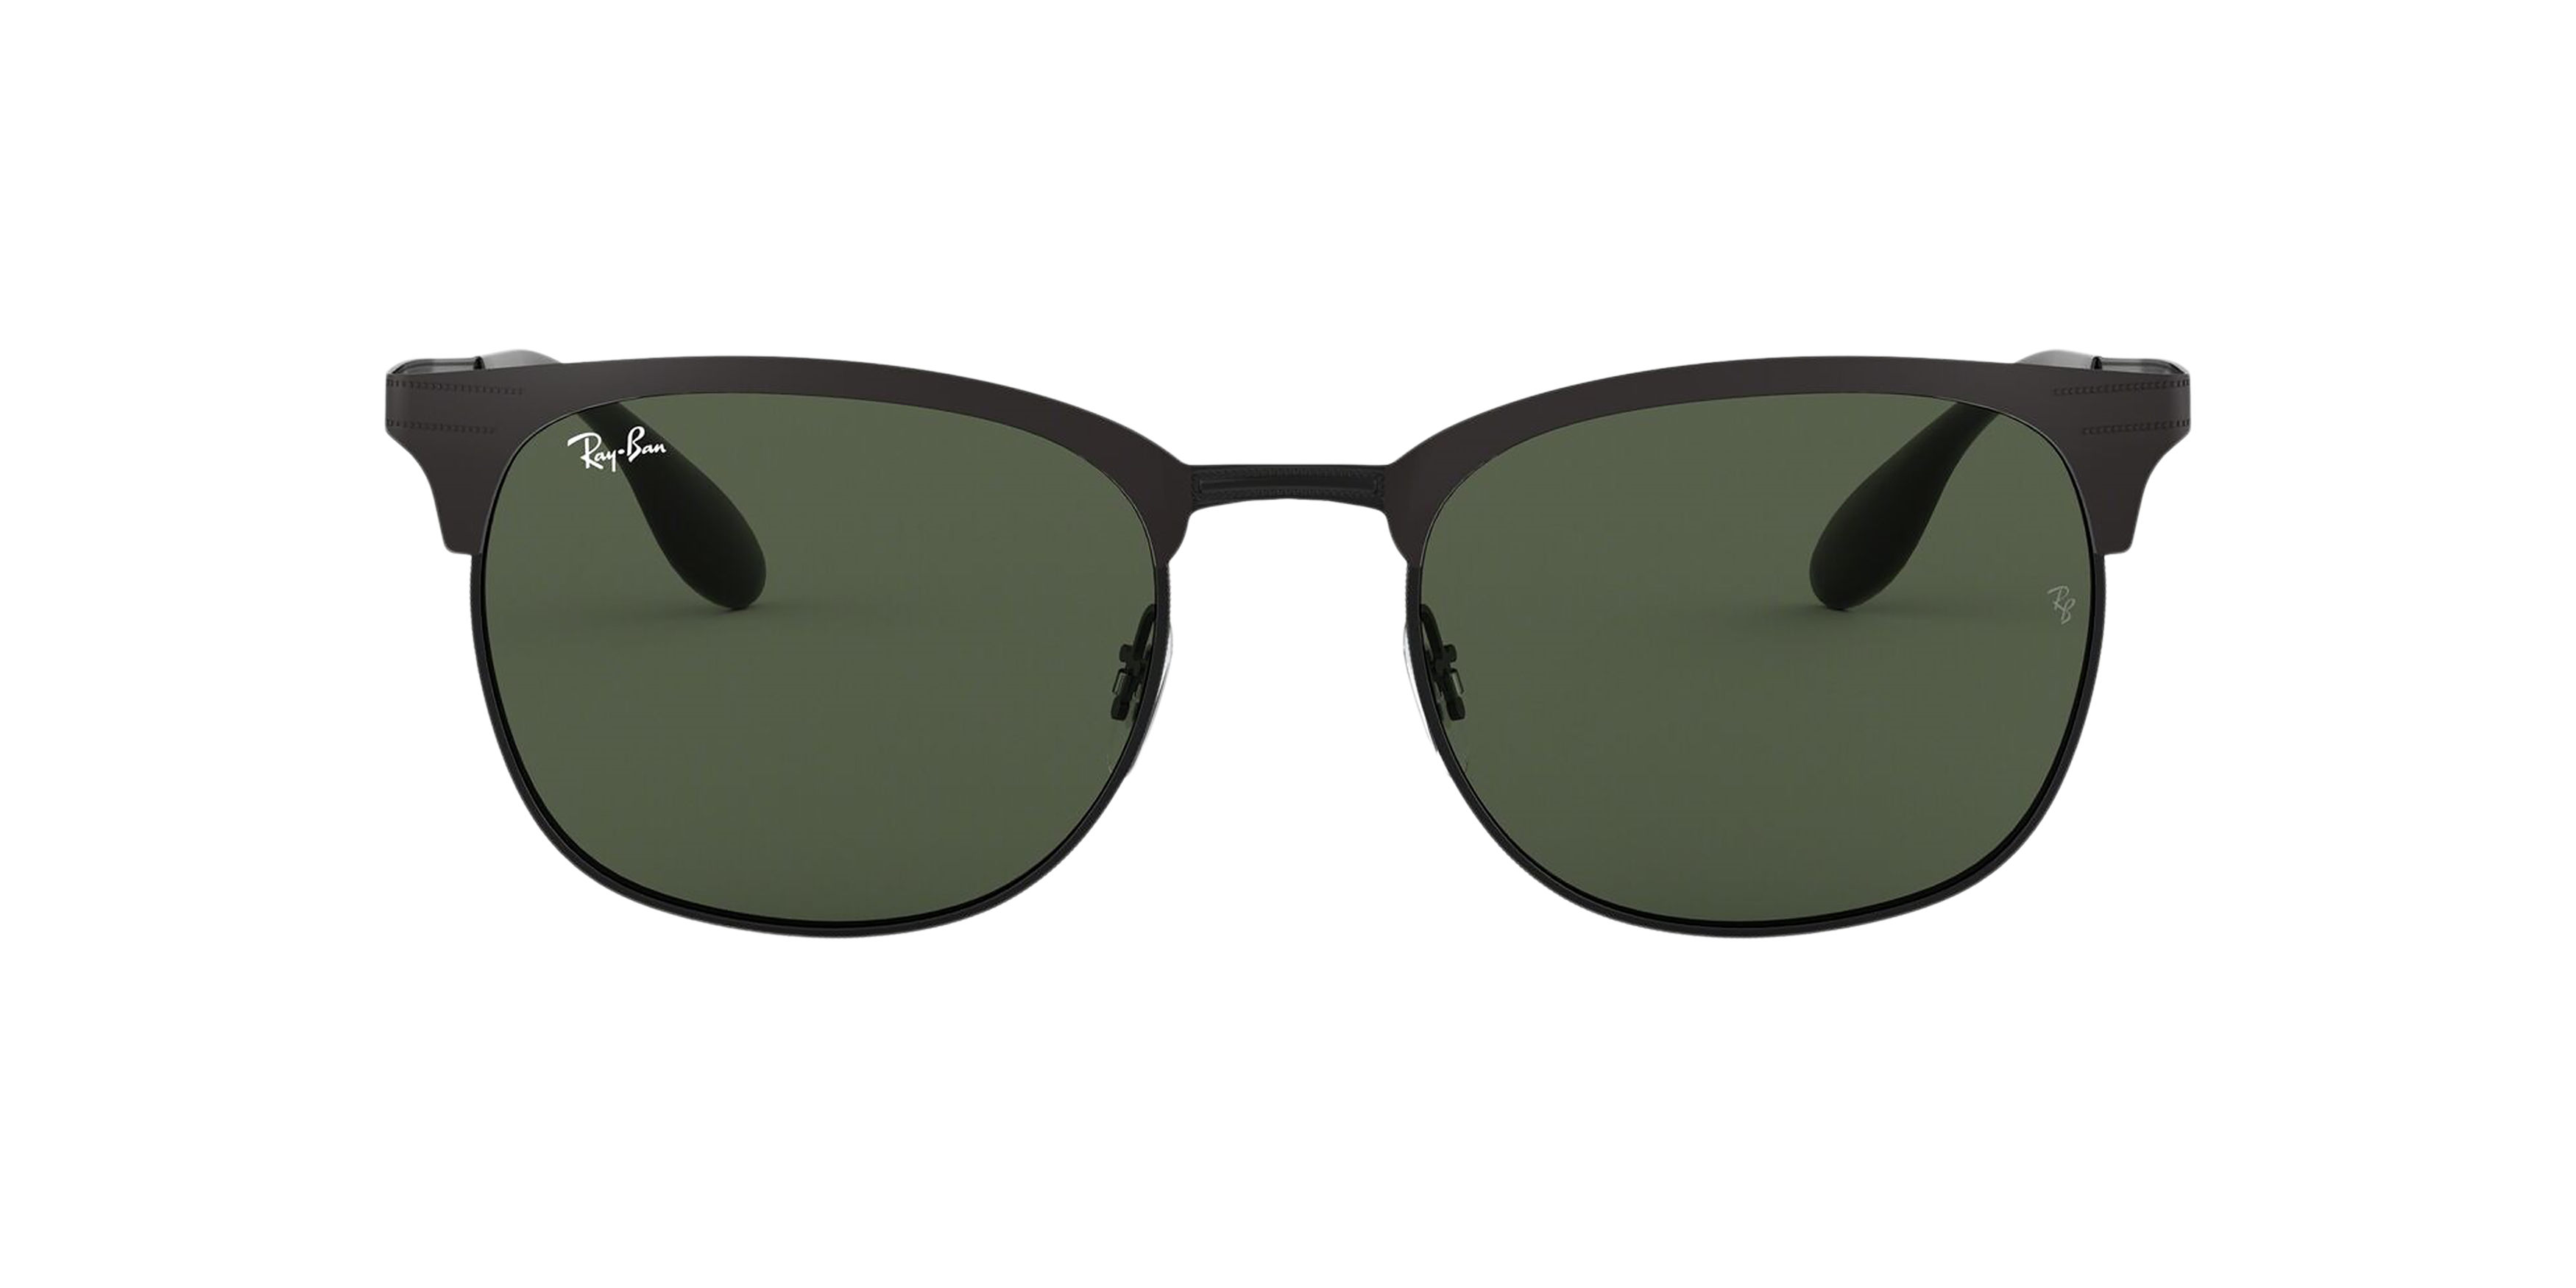 [products.image.front] Ray-Ban RB3538 186/71